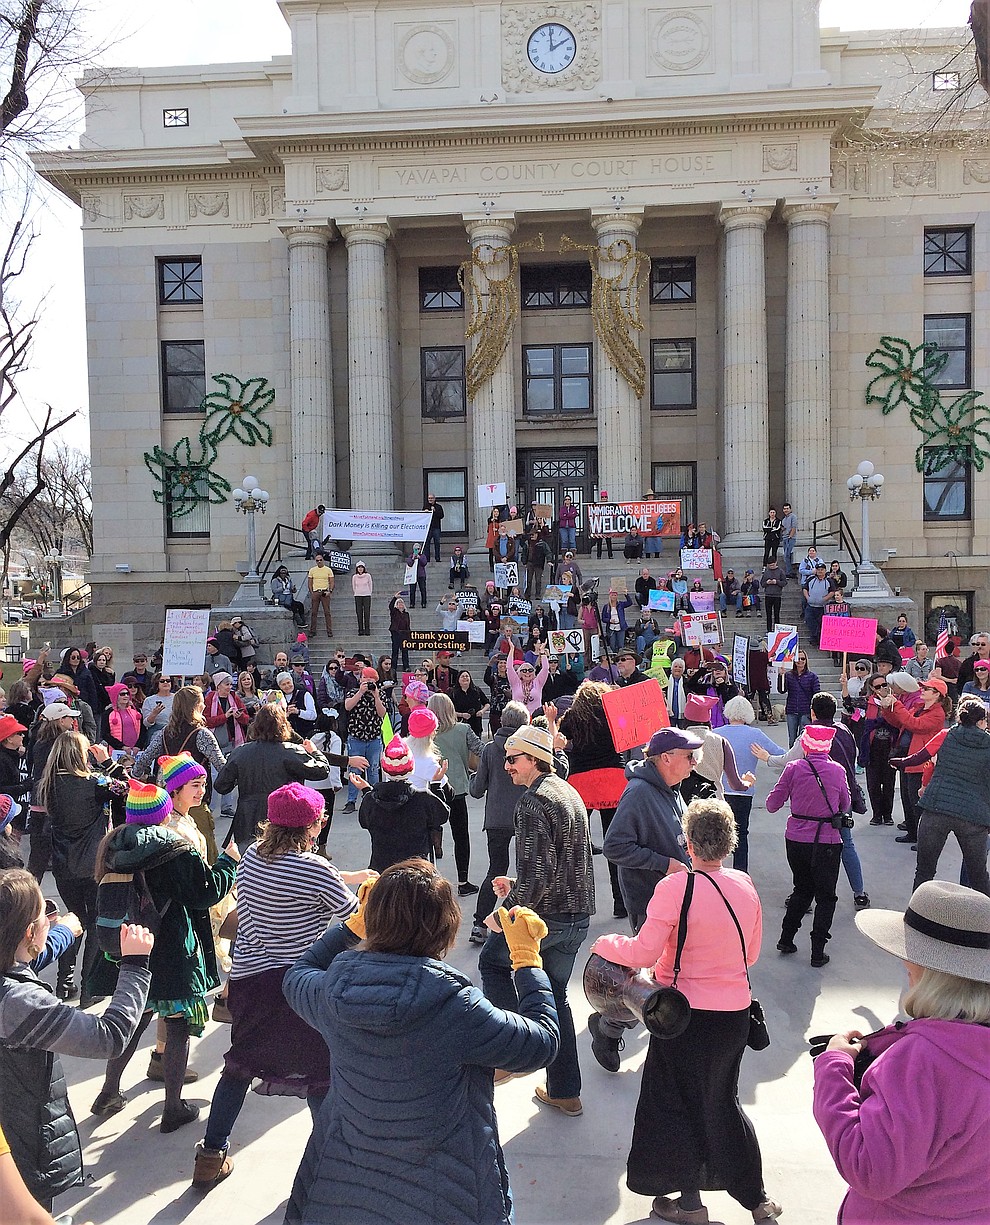 Participants perform a lively flash mob dance on the Yavapai County Courthouse during the Yavapai County Women March On event Jan. 19, 2019. (Sue Tone/Courier)